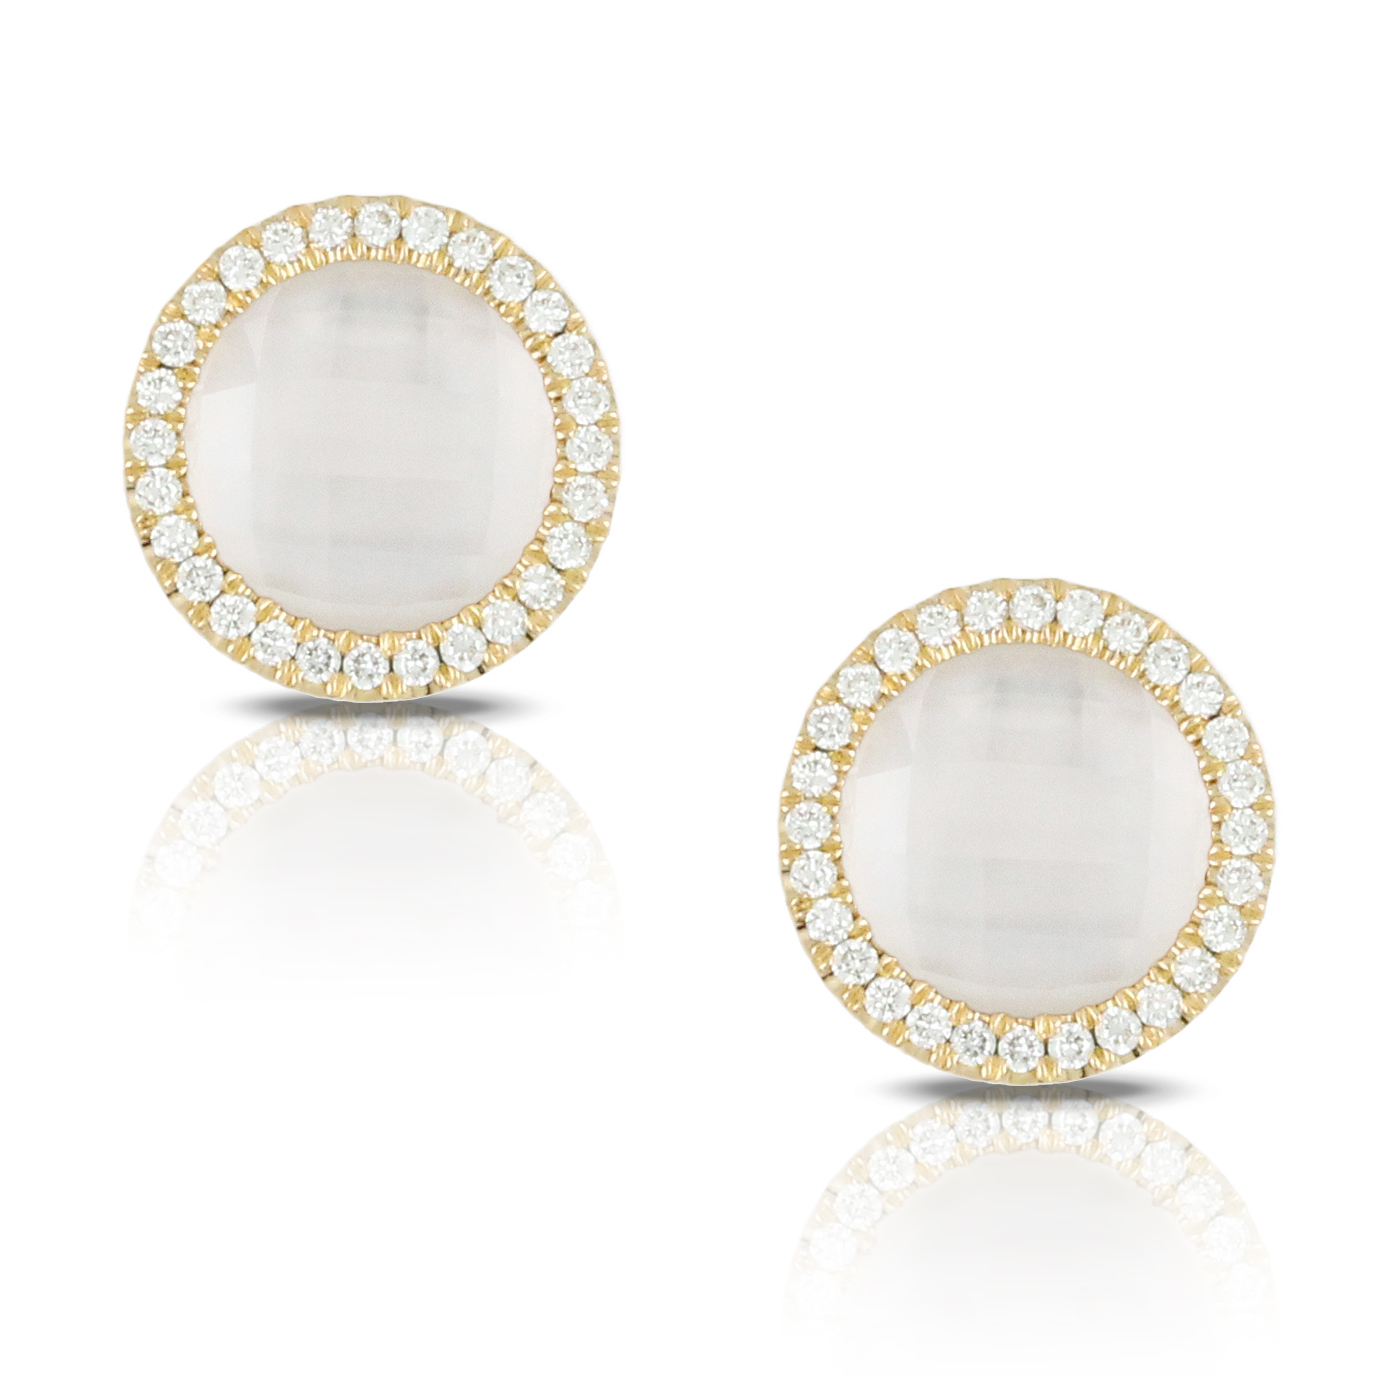 18K Yellow Gold Diamond Earring With Clear Quartz Over White Mother Of Pearl